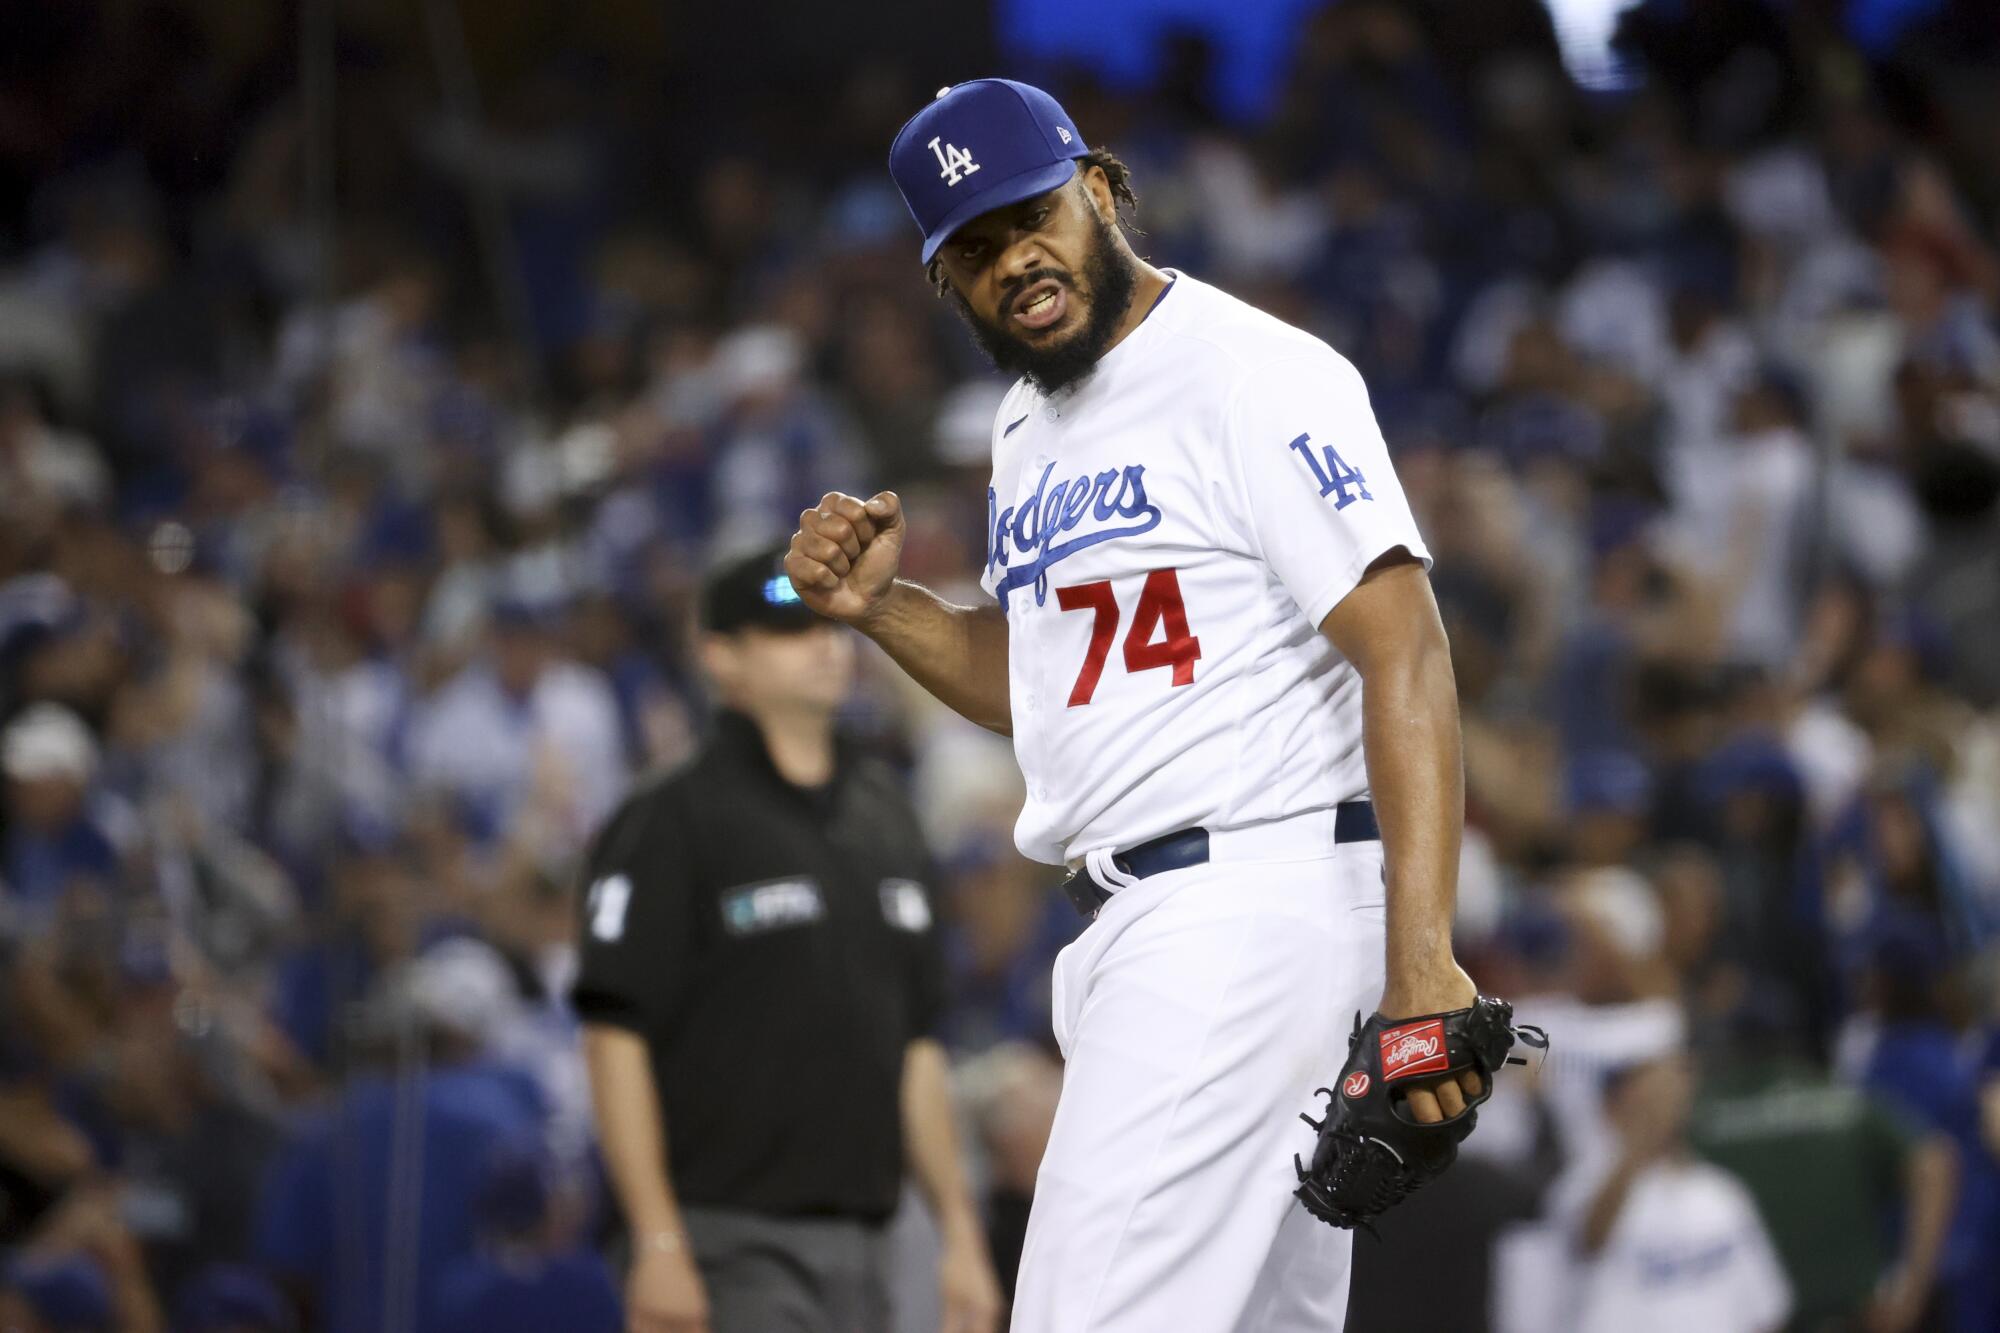 Dodgers closer Kenley Jansen reacts on the mound during the ninth inning.